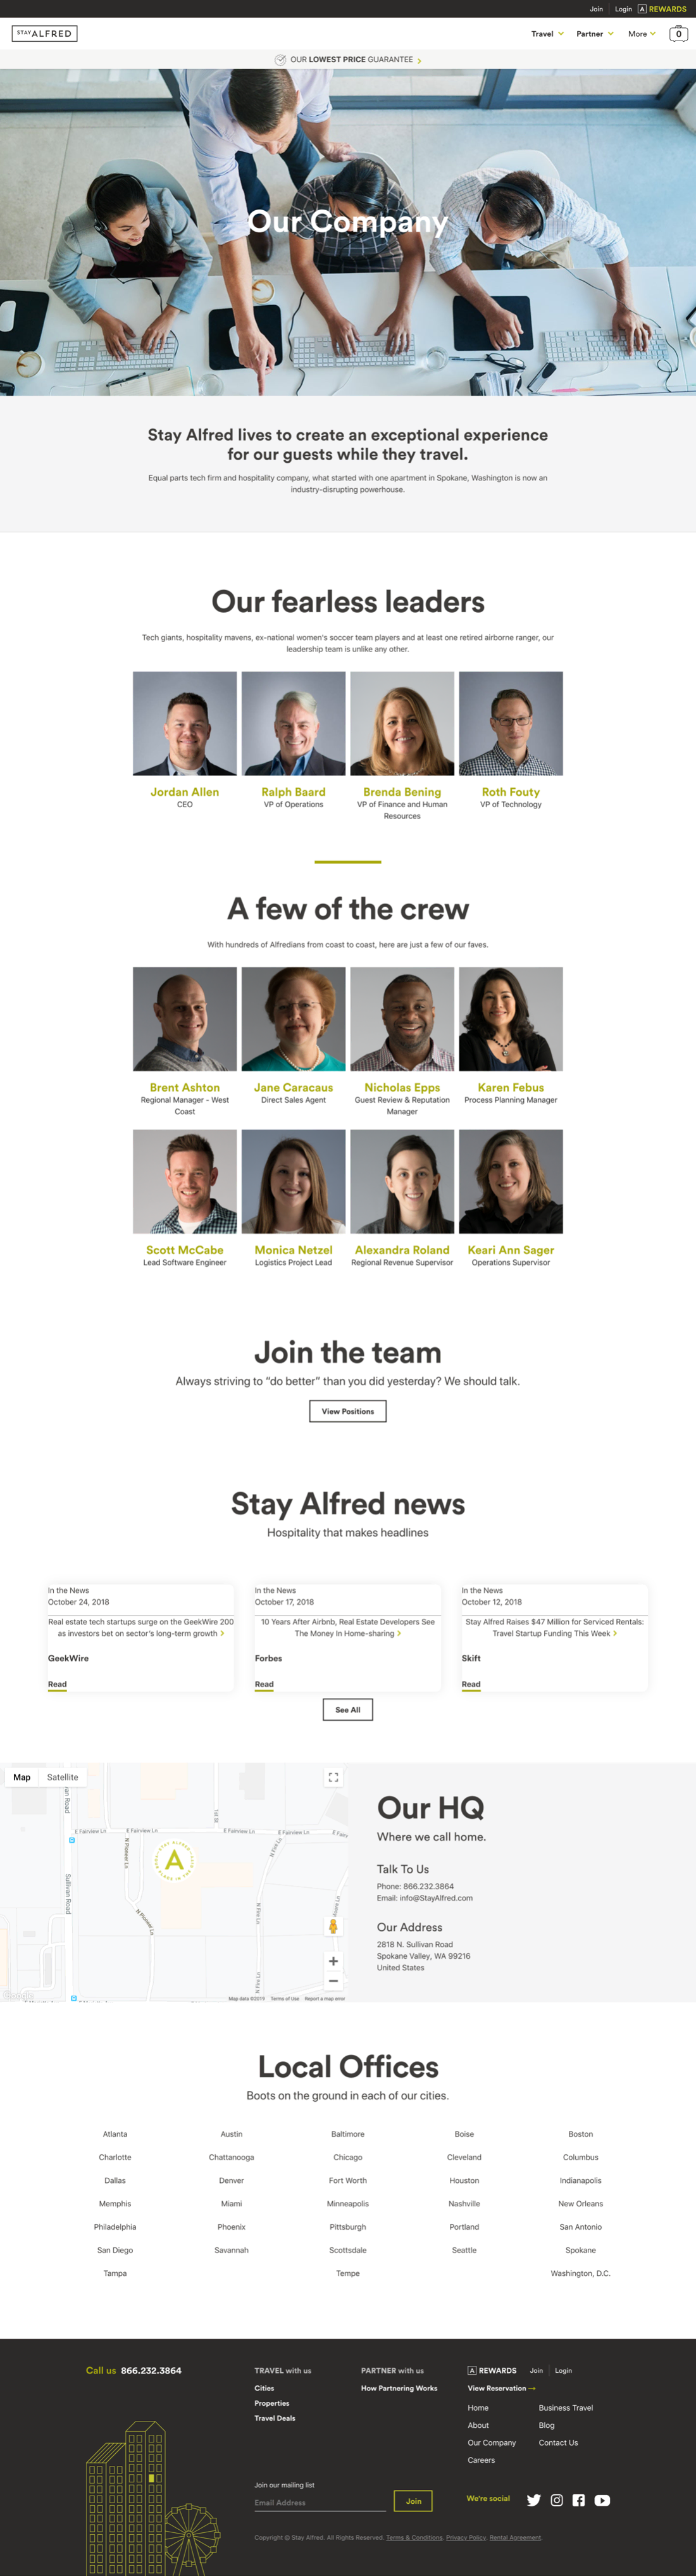 Stay Alfred Company Page V1